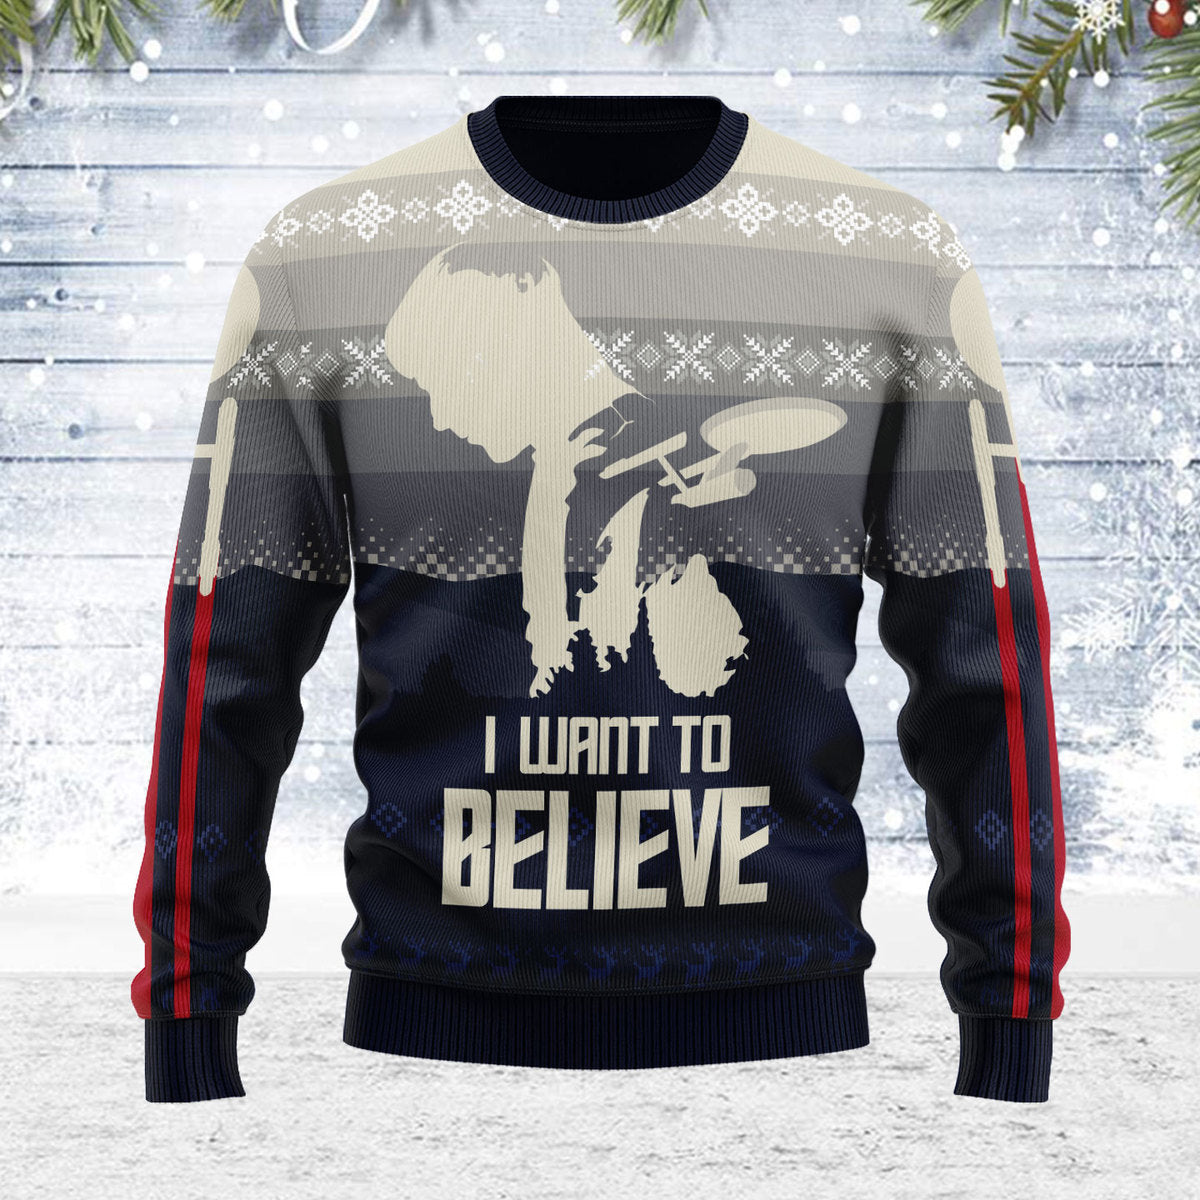 Star Trek I Want To Believe Christmas - Sweater - Ugly Christmas Sweater